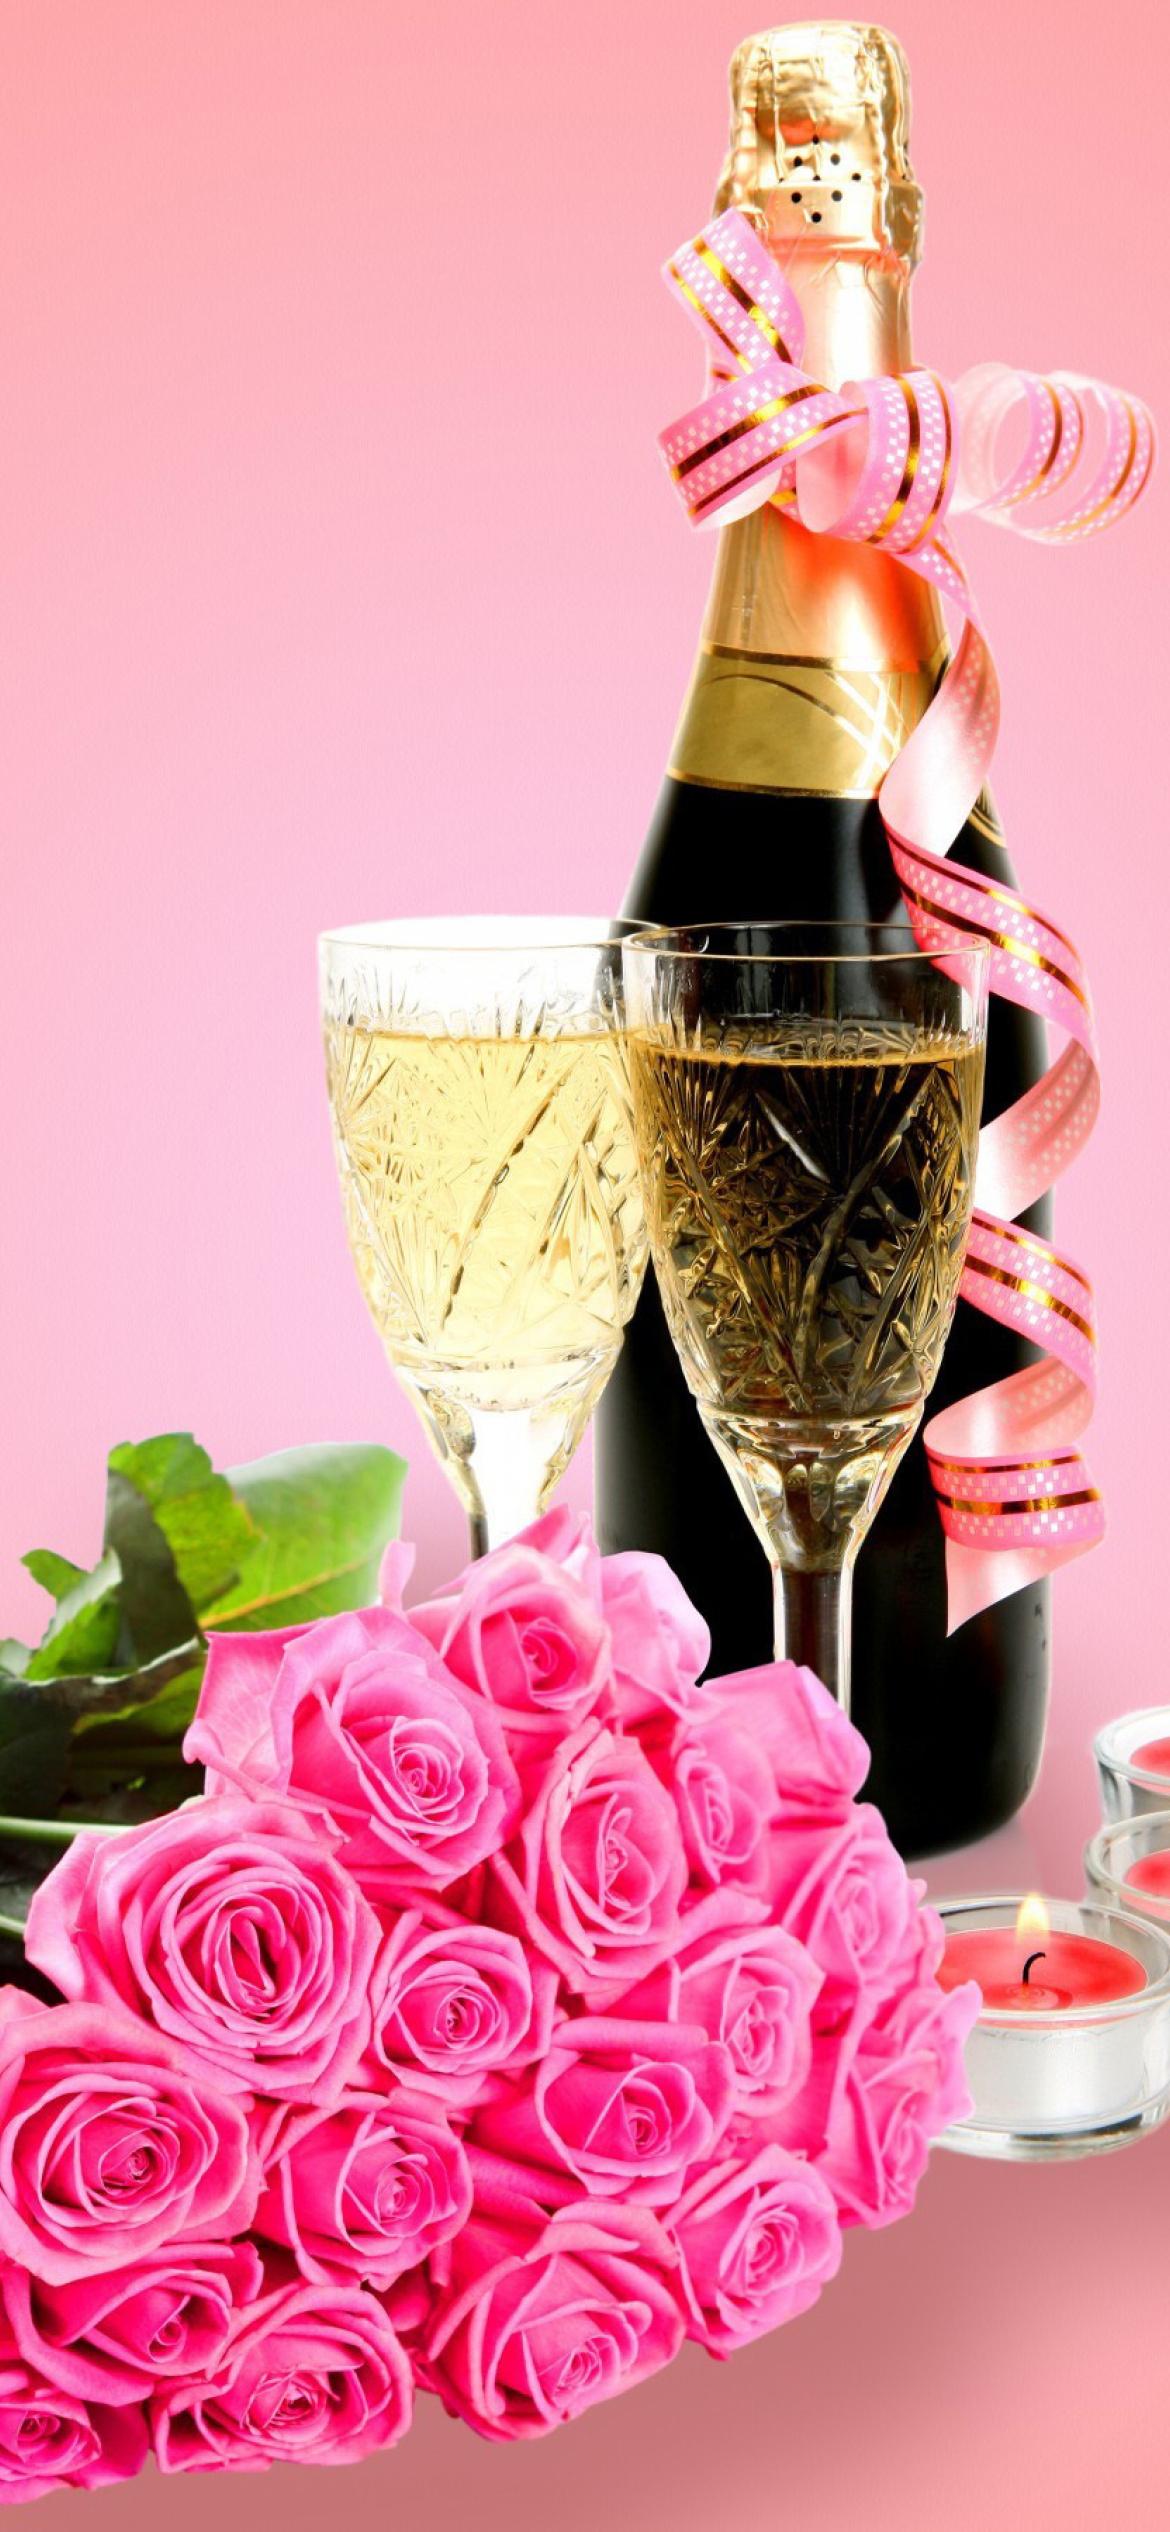 Clipart Roses Bouquet and Champagne screenshot #1 1170x2532